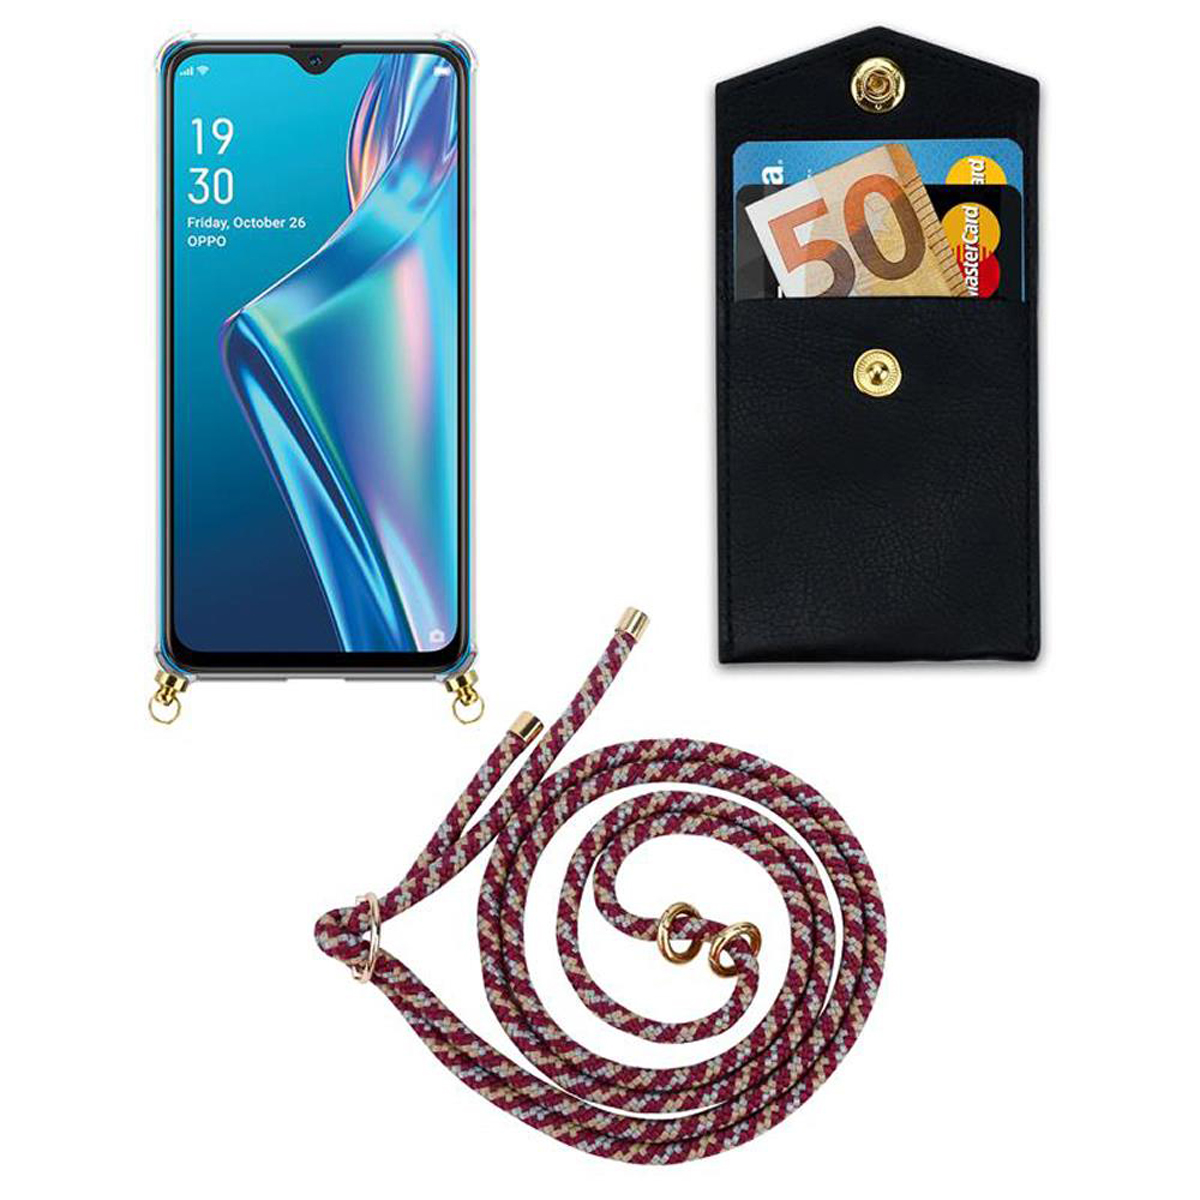 WEIß Ringen, abnehmbarer CADORABO Oppo, Band Hülle, Kordel GELB Backcover, A12, ROT Handy mit Kette Gold und